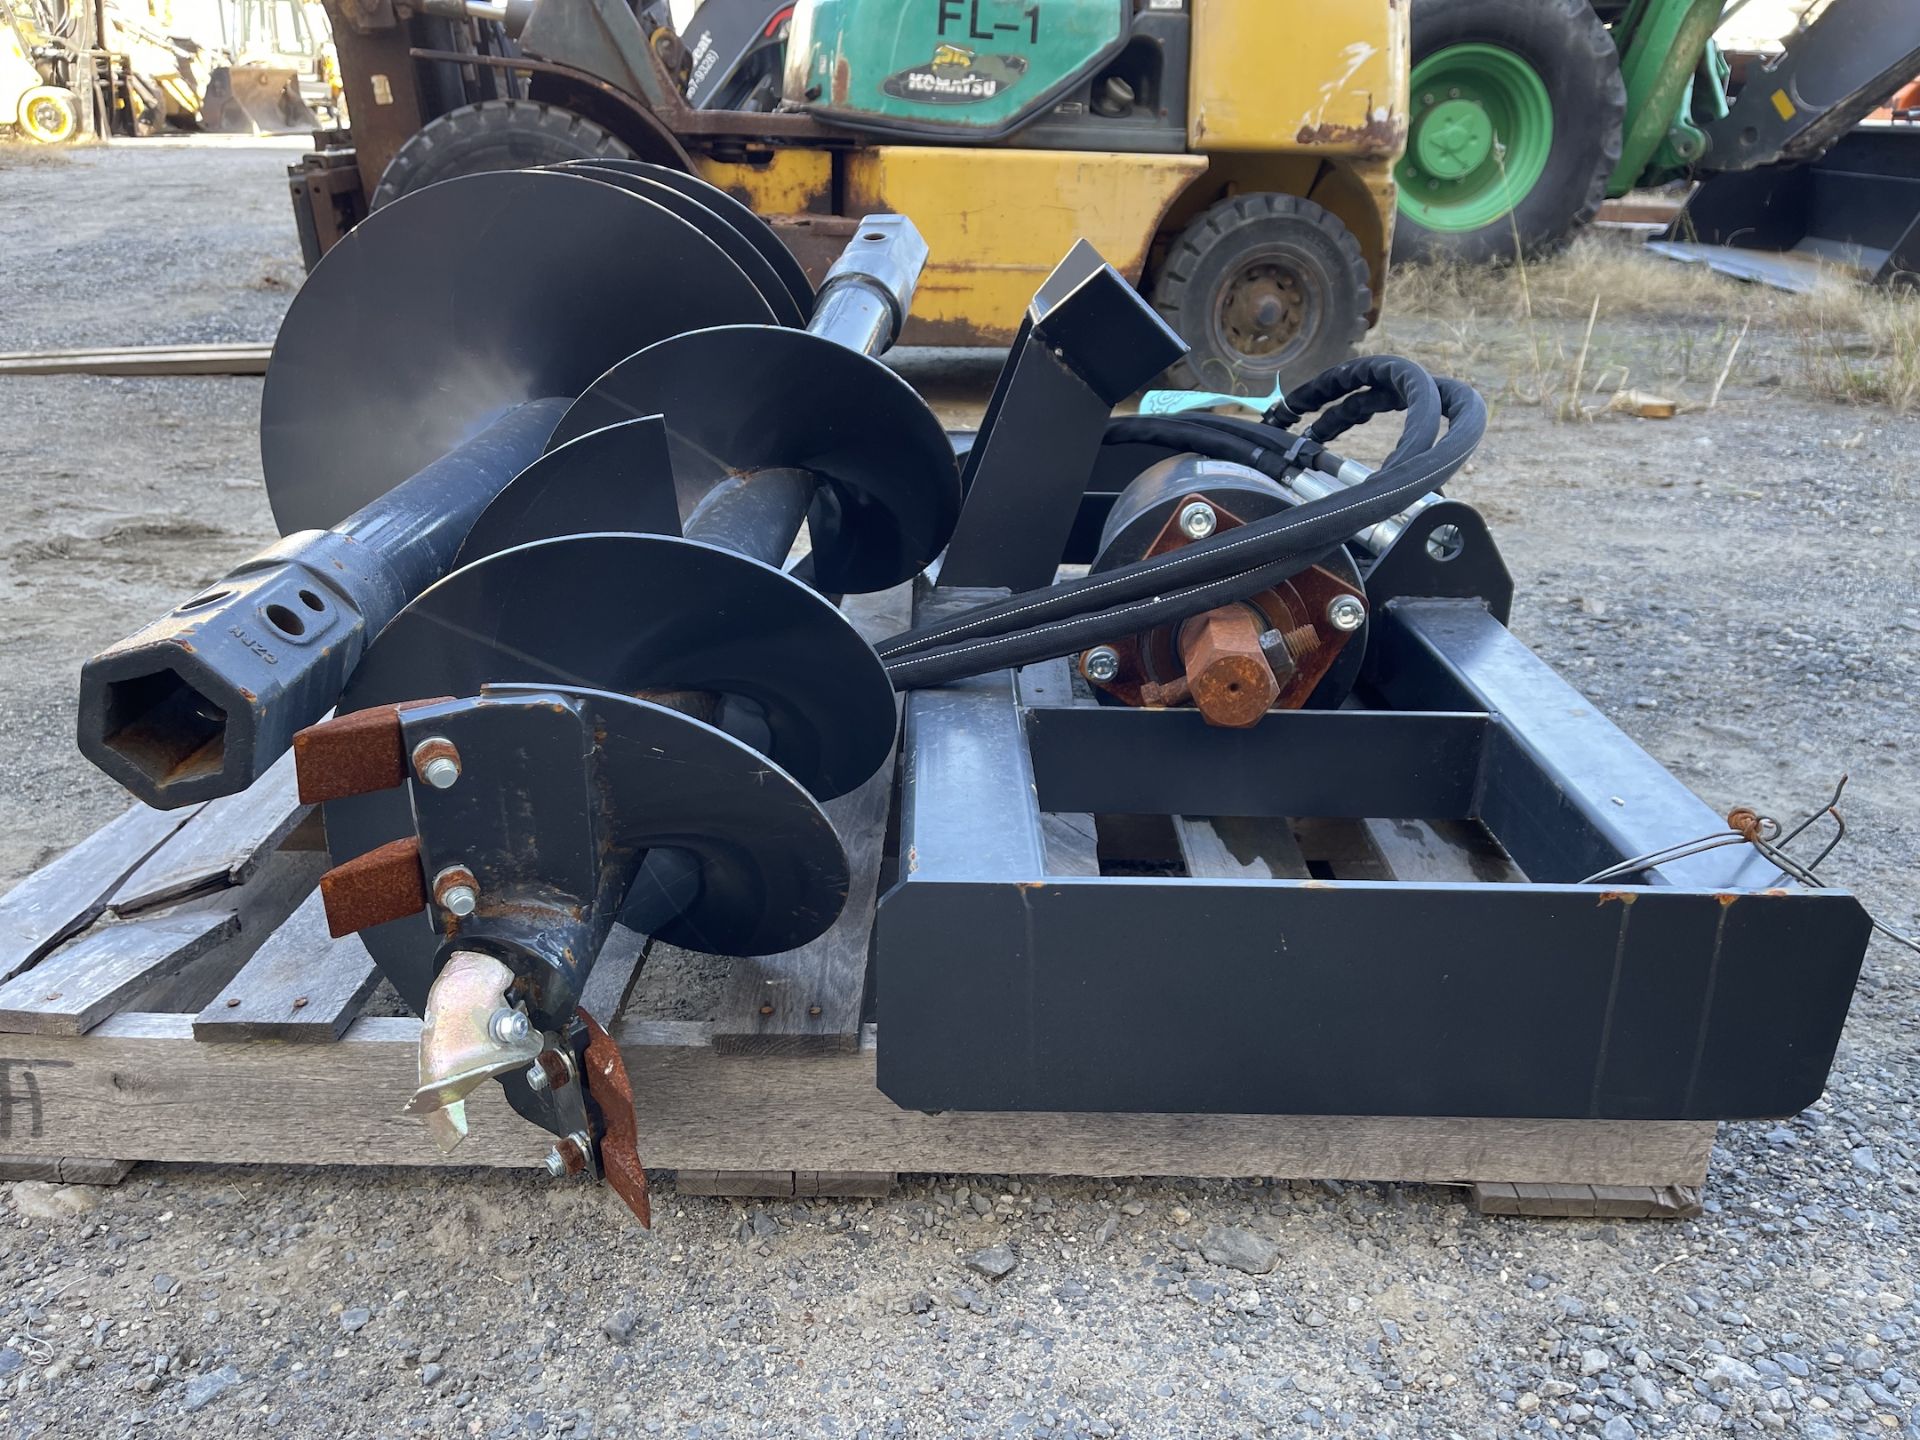 New Wolverine Auger Skid Steer Attachment (C171E) - Image 9 of 11